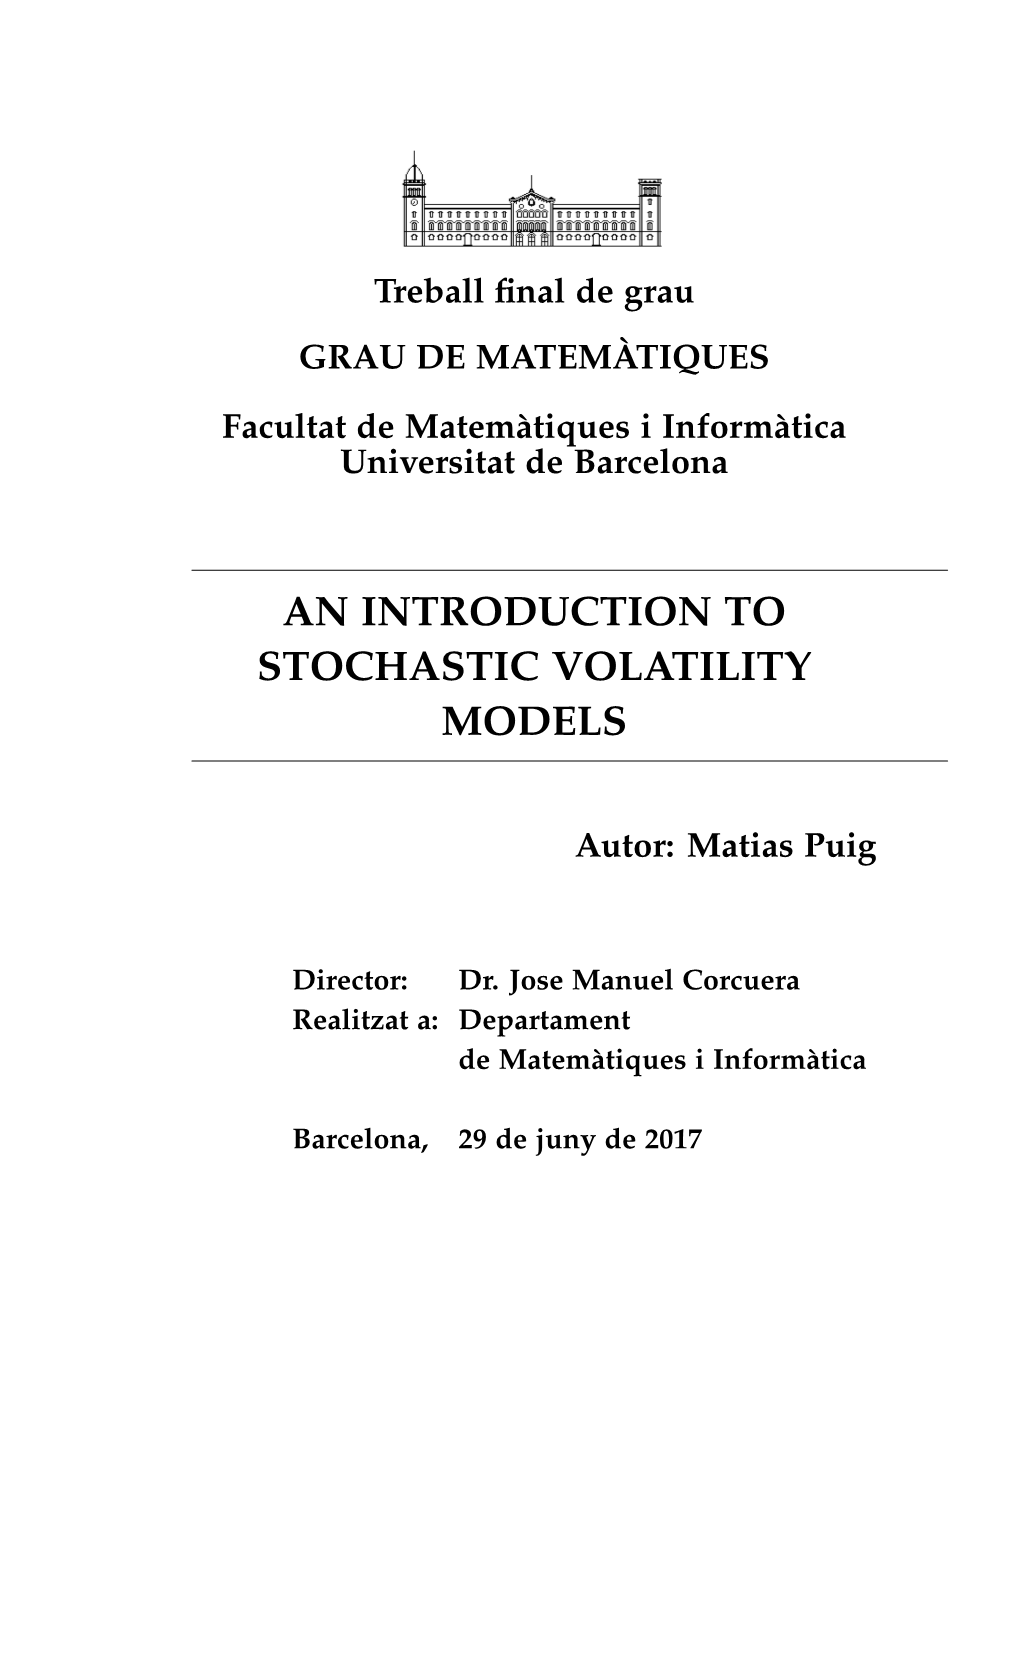 An Introduction to Stochastic Volatility Models